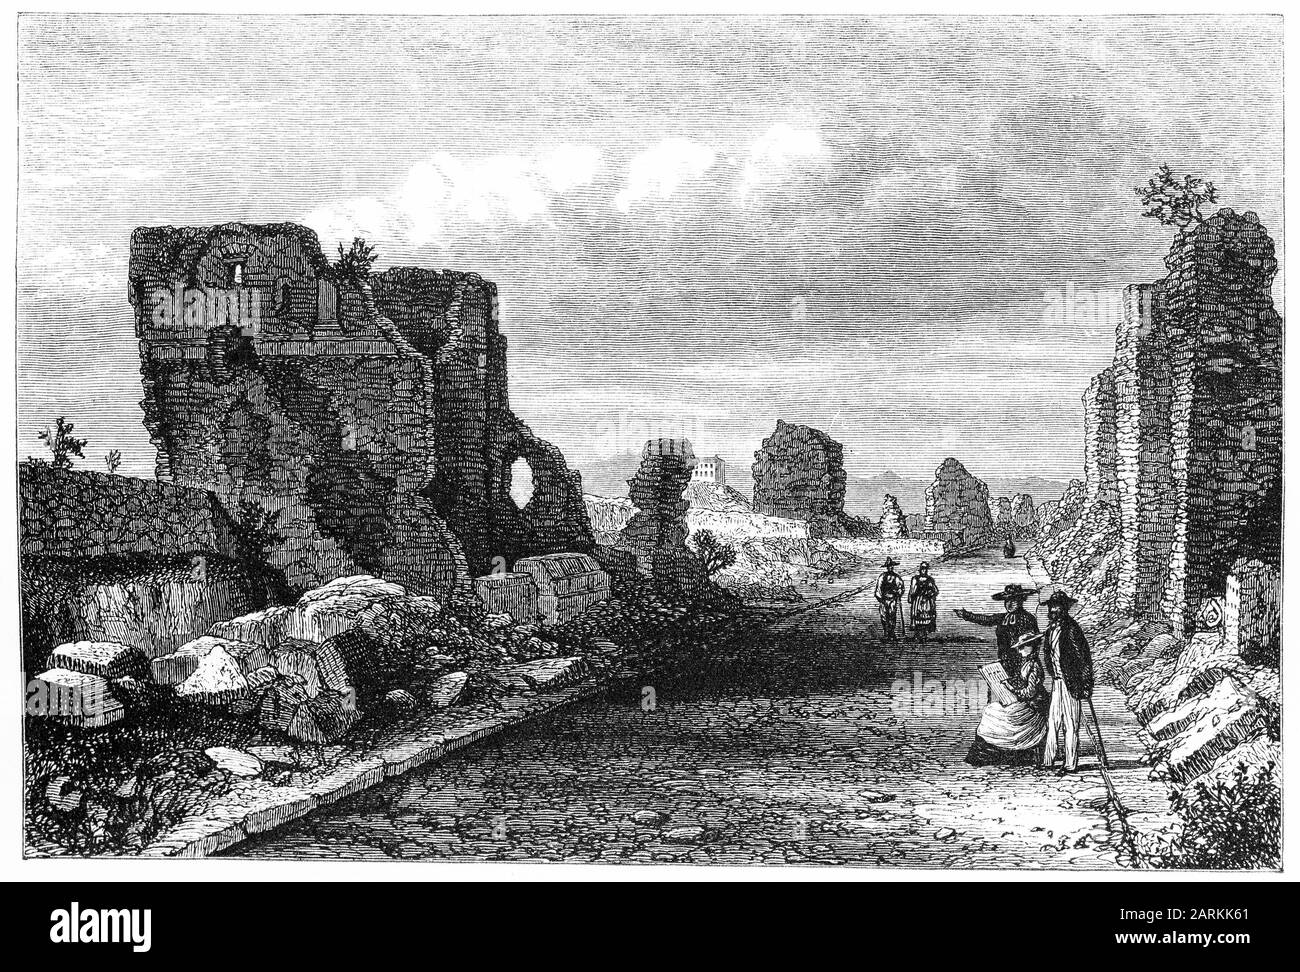 Engraving of the via appia 5 miles from Rome, in ruins and awaiting restoration Stock Photo